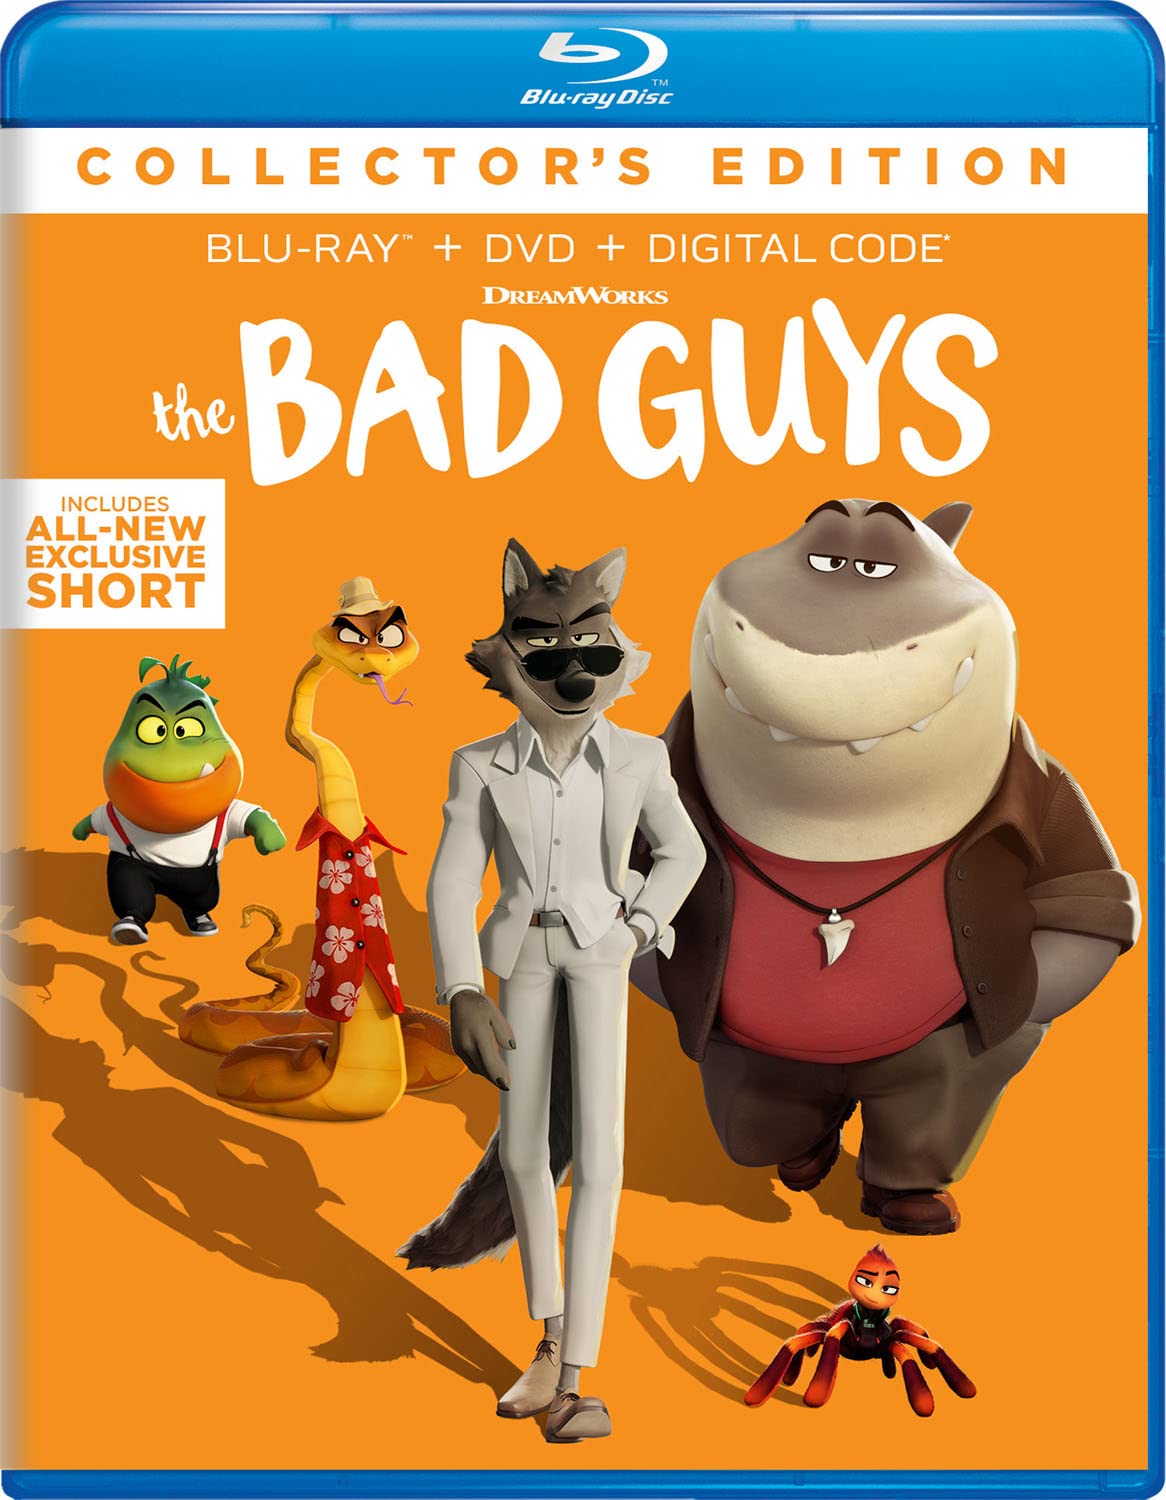 The Bad Guys - Collectors Edition Blu-ray